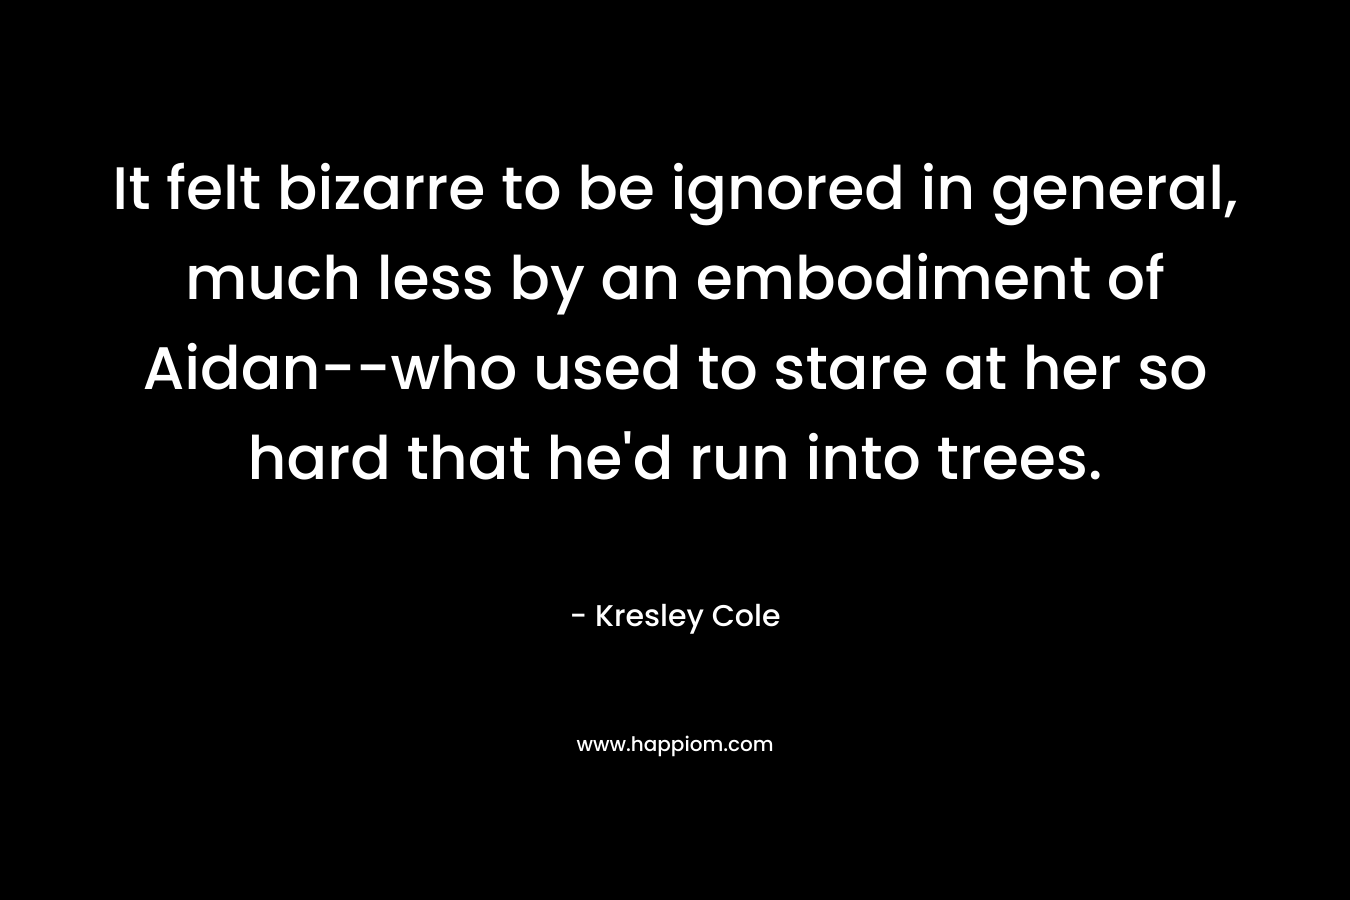 It felt bizarre to be ignored in general, much less by an embodiment of Aidan–who used to stare at her so hard that he’d run into trees. – Kresley Cole